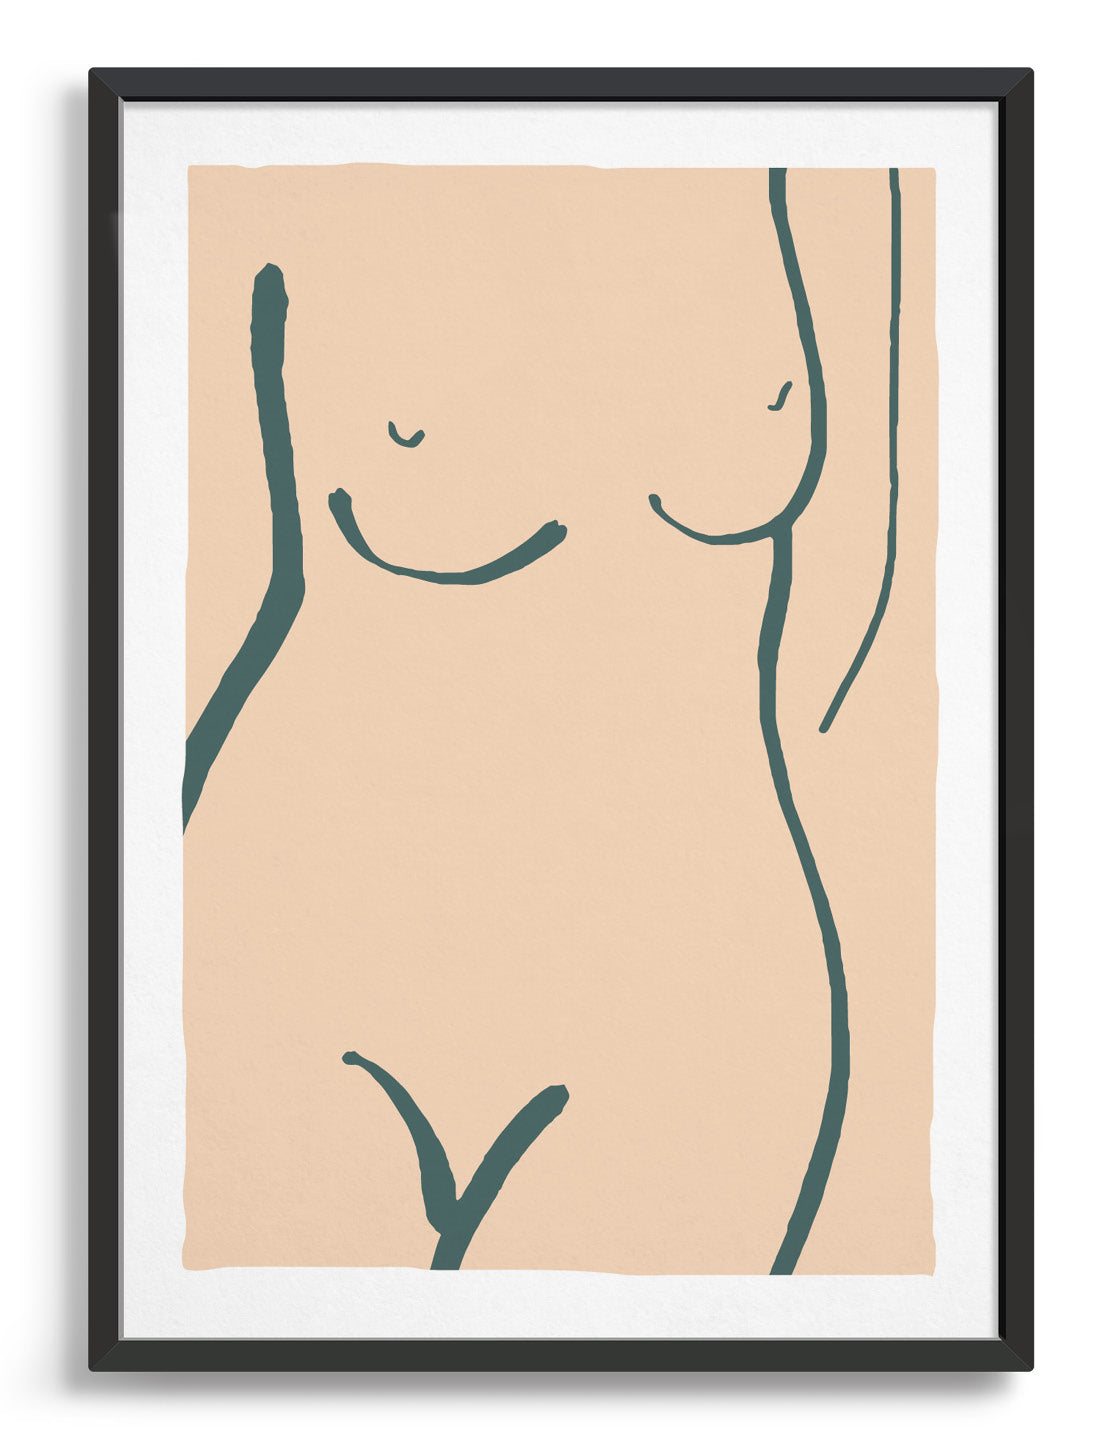 grey line drawing of a naked woman's torso against a salmon pink background